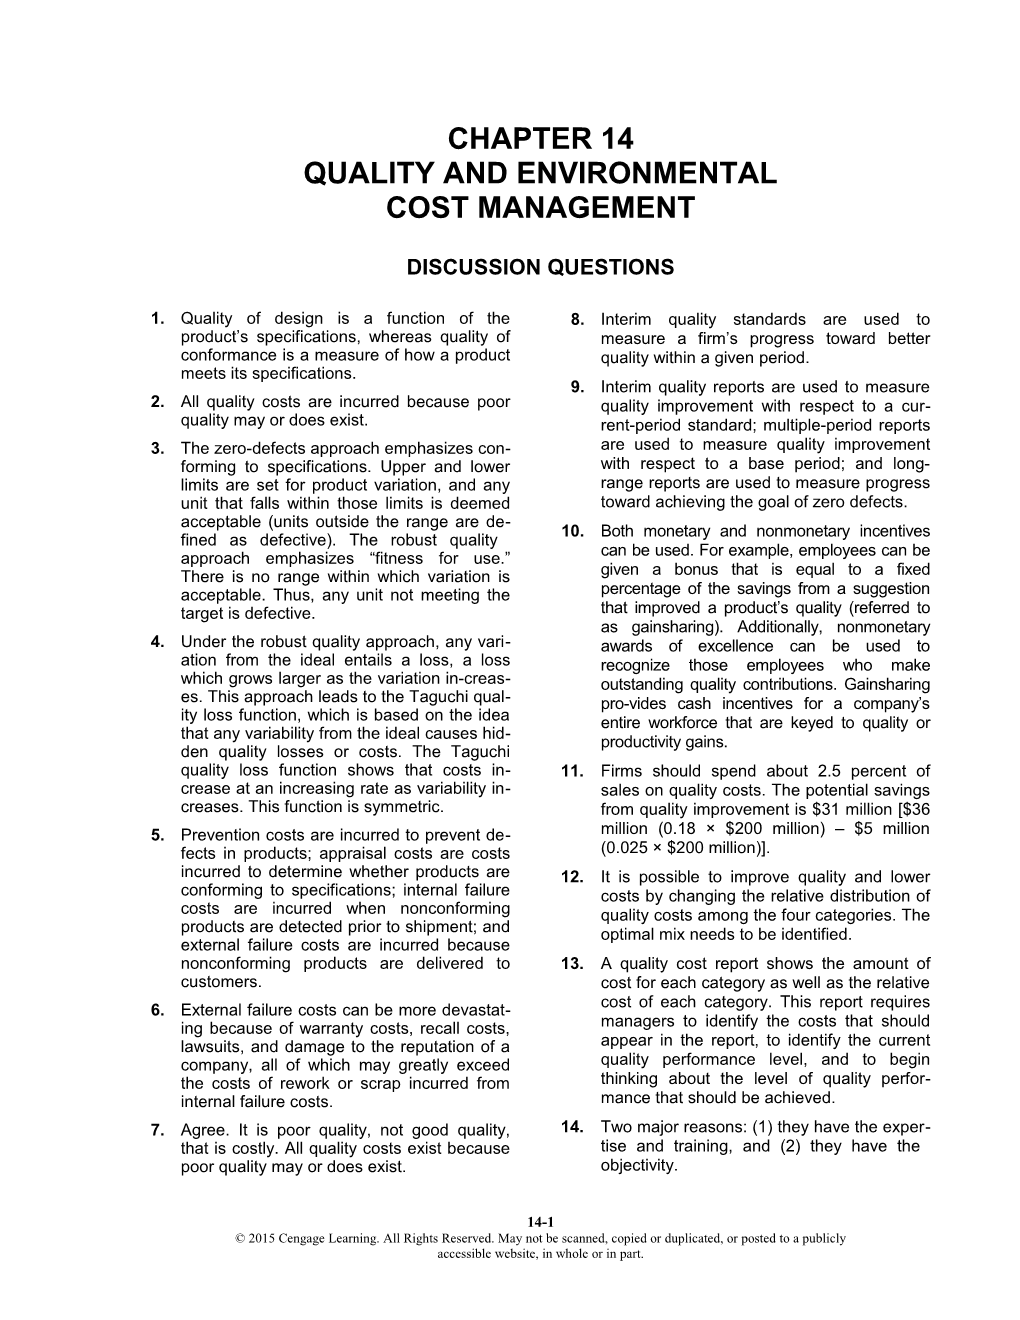 Chapter 17: Quality Cost Management